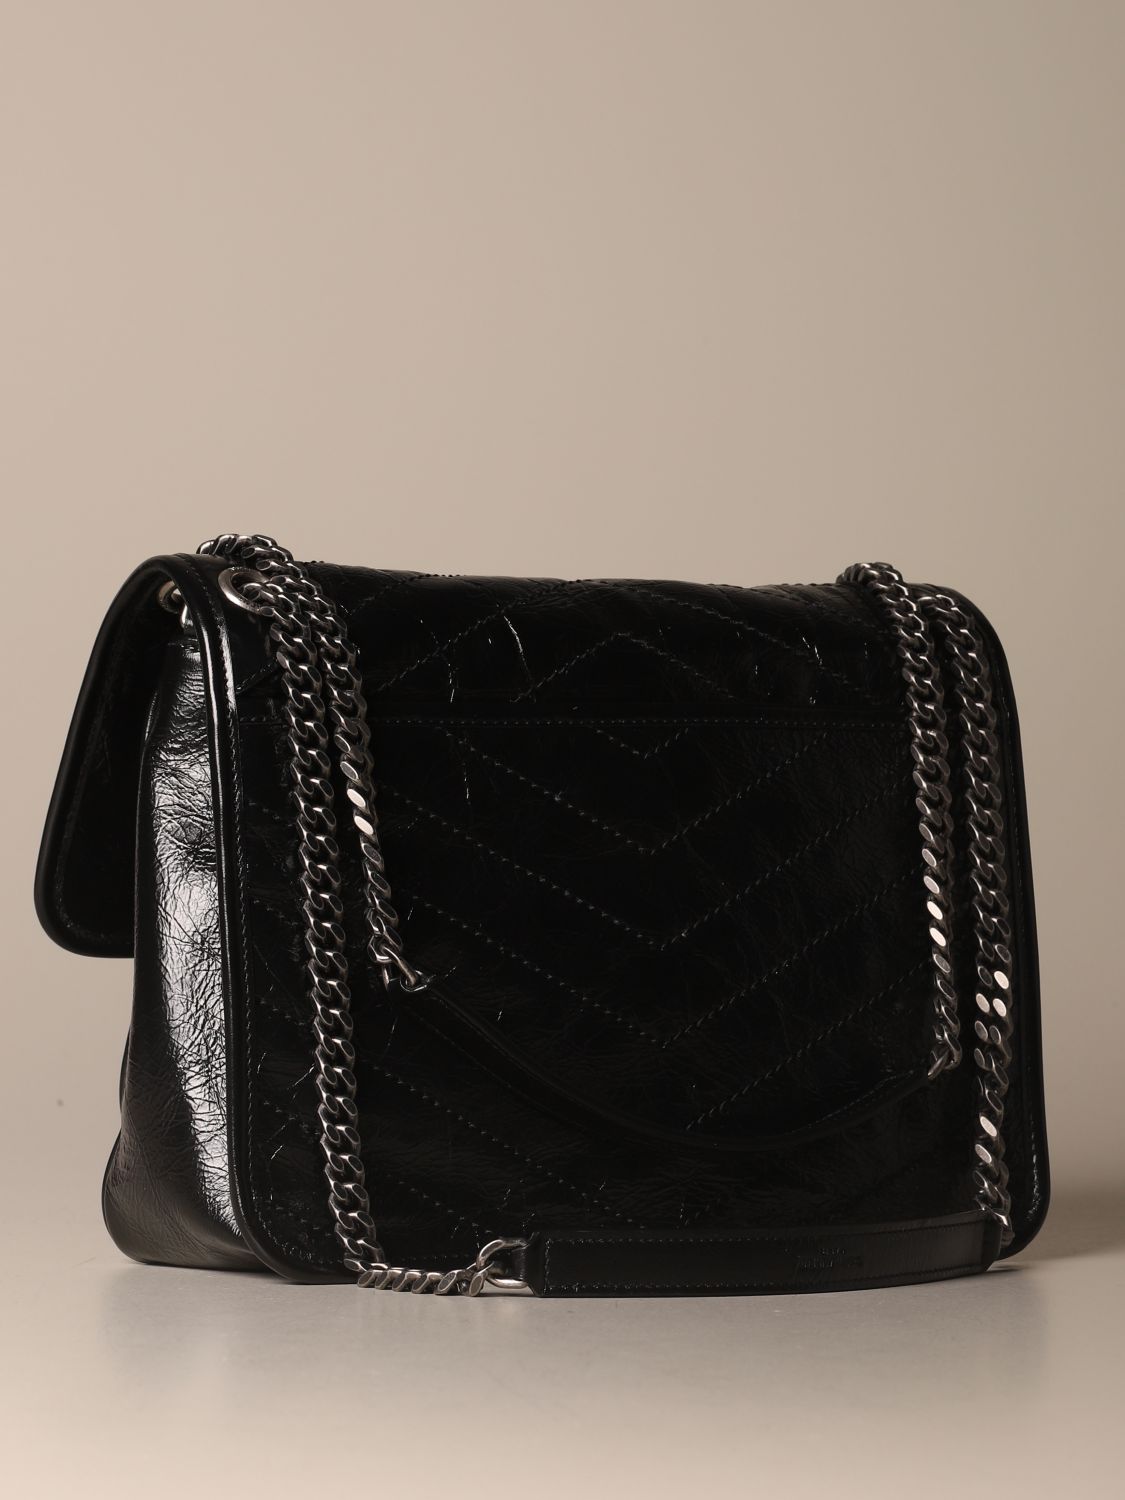 SAINT LAURENT: Monogram Niki bag in shiny and quilted leather - Black ...